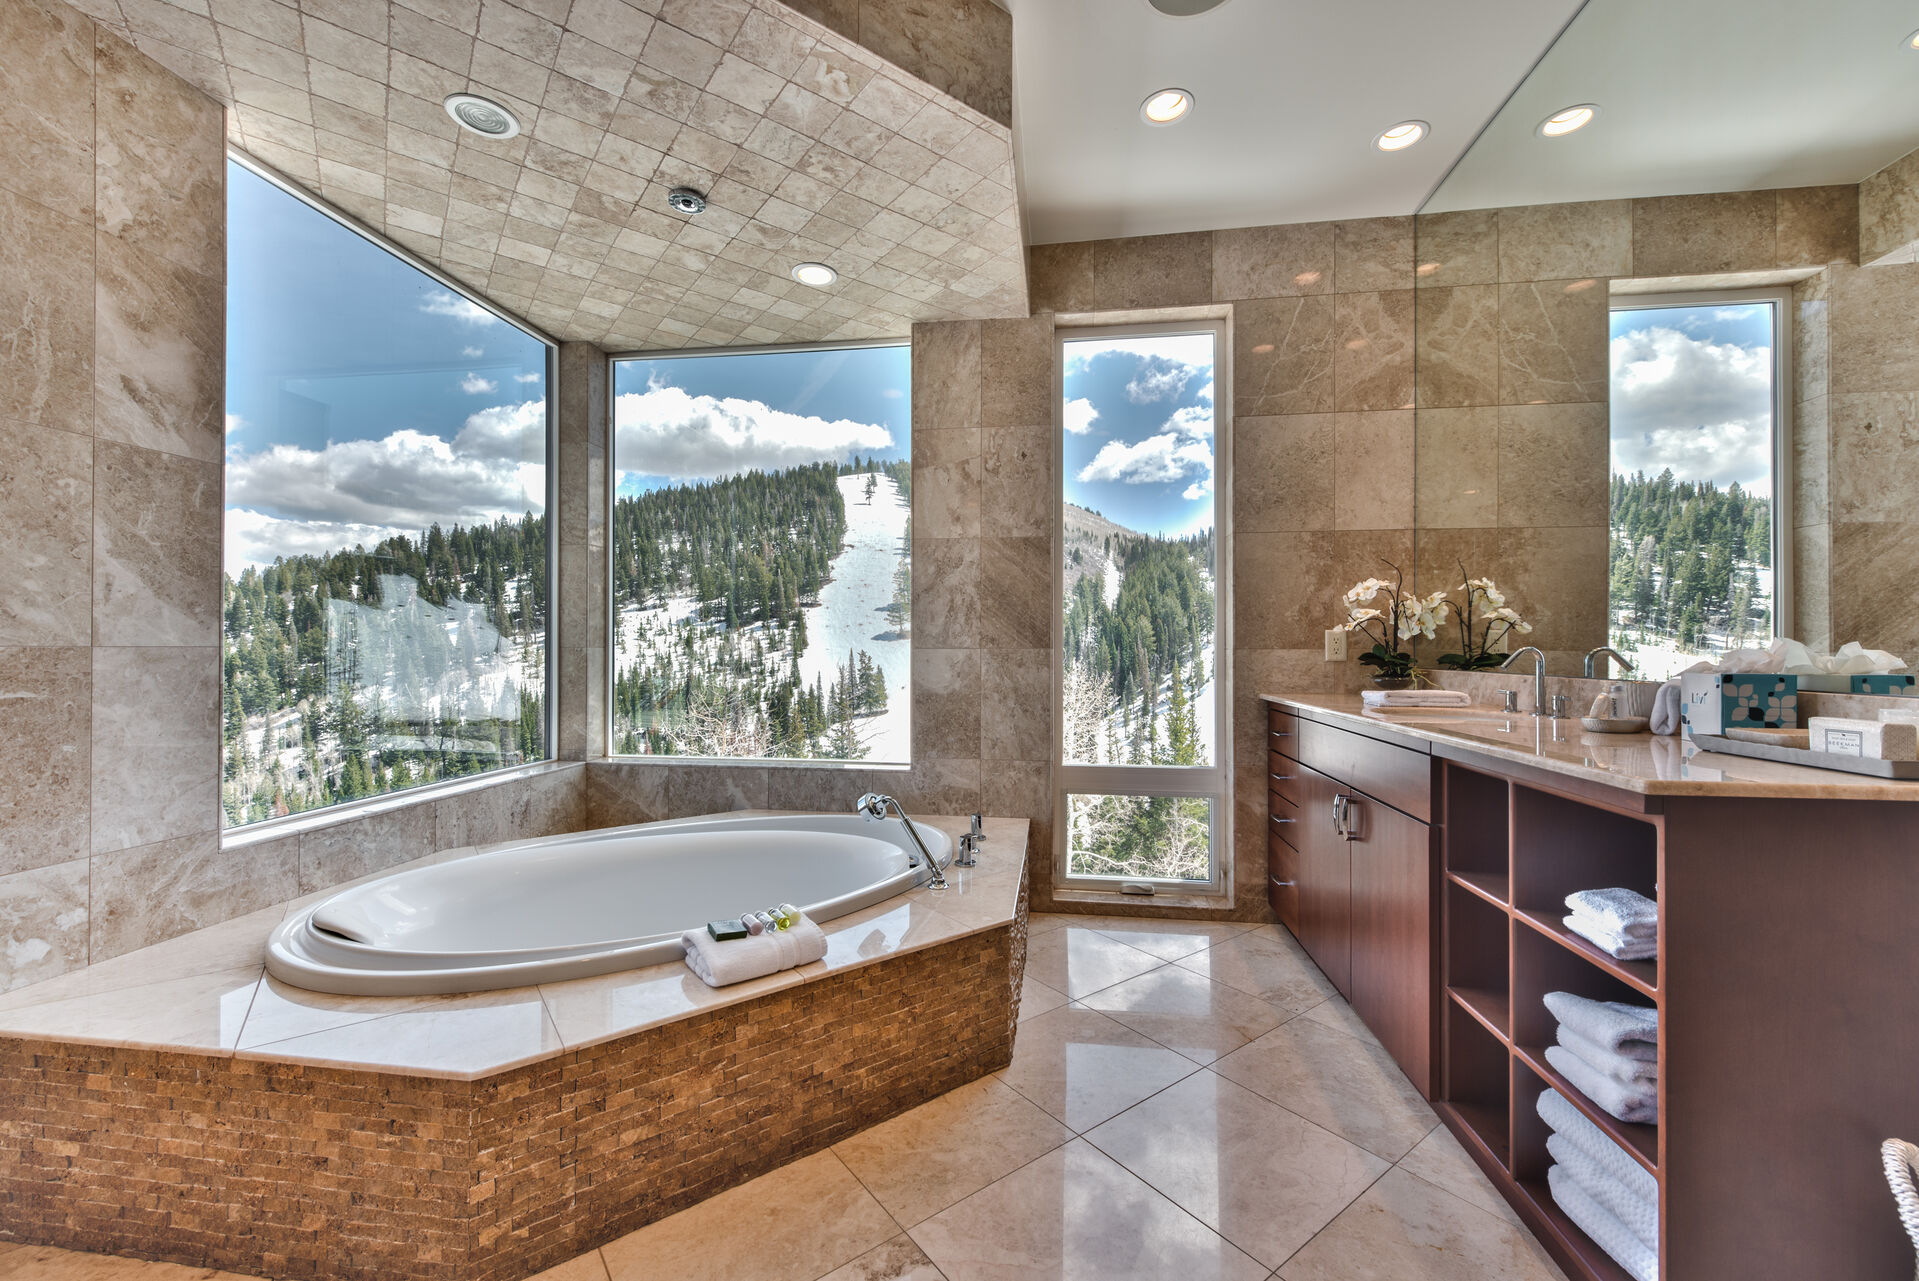 Stunning Grand Master Bath with a Soaking Tub and Radiant Tile Floors